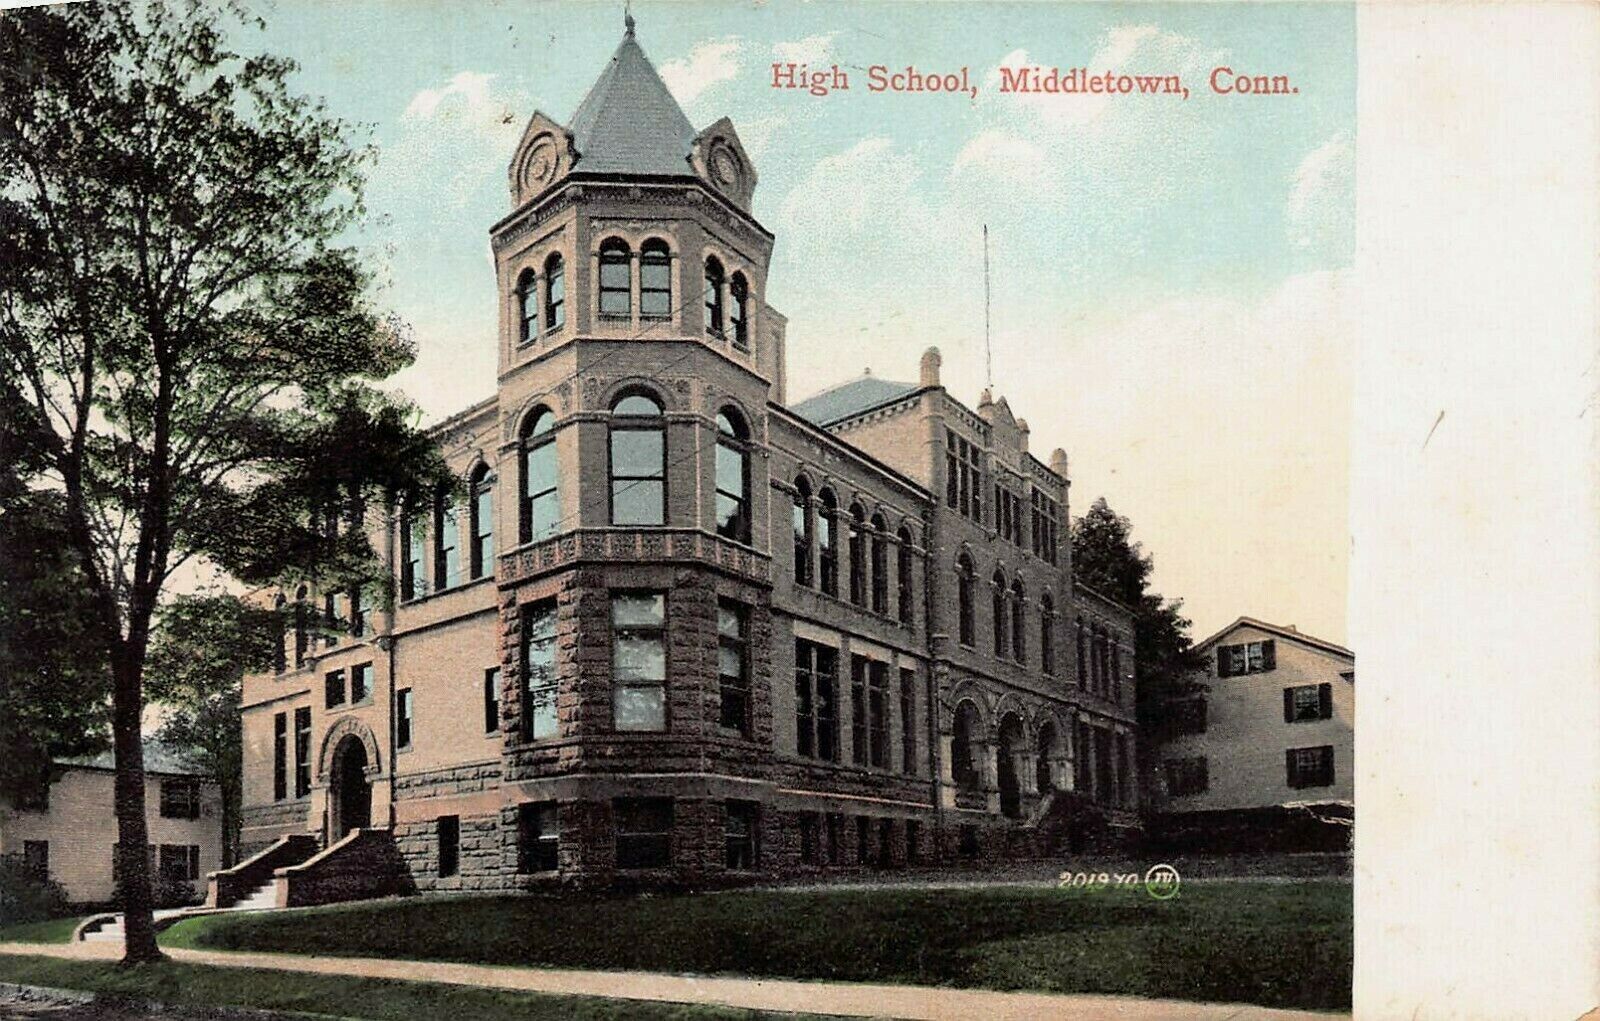 High School, Middletown, Connecticut, Early Postcard, Used in 1911